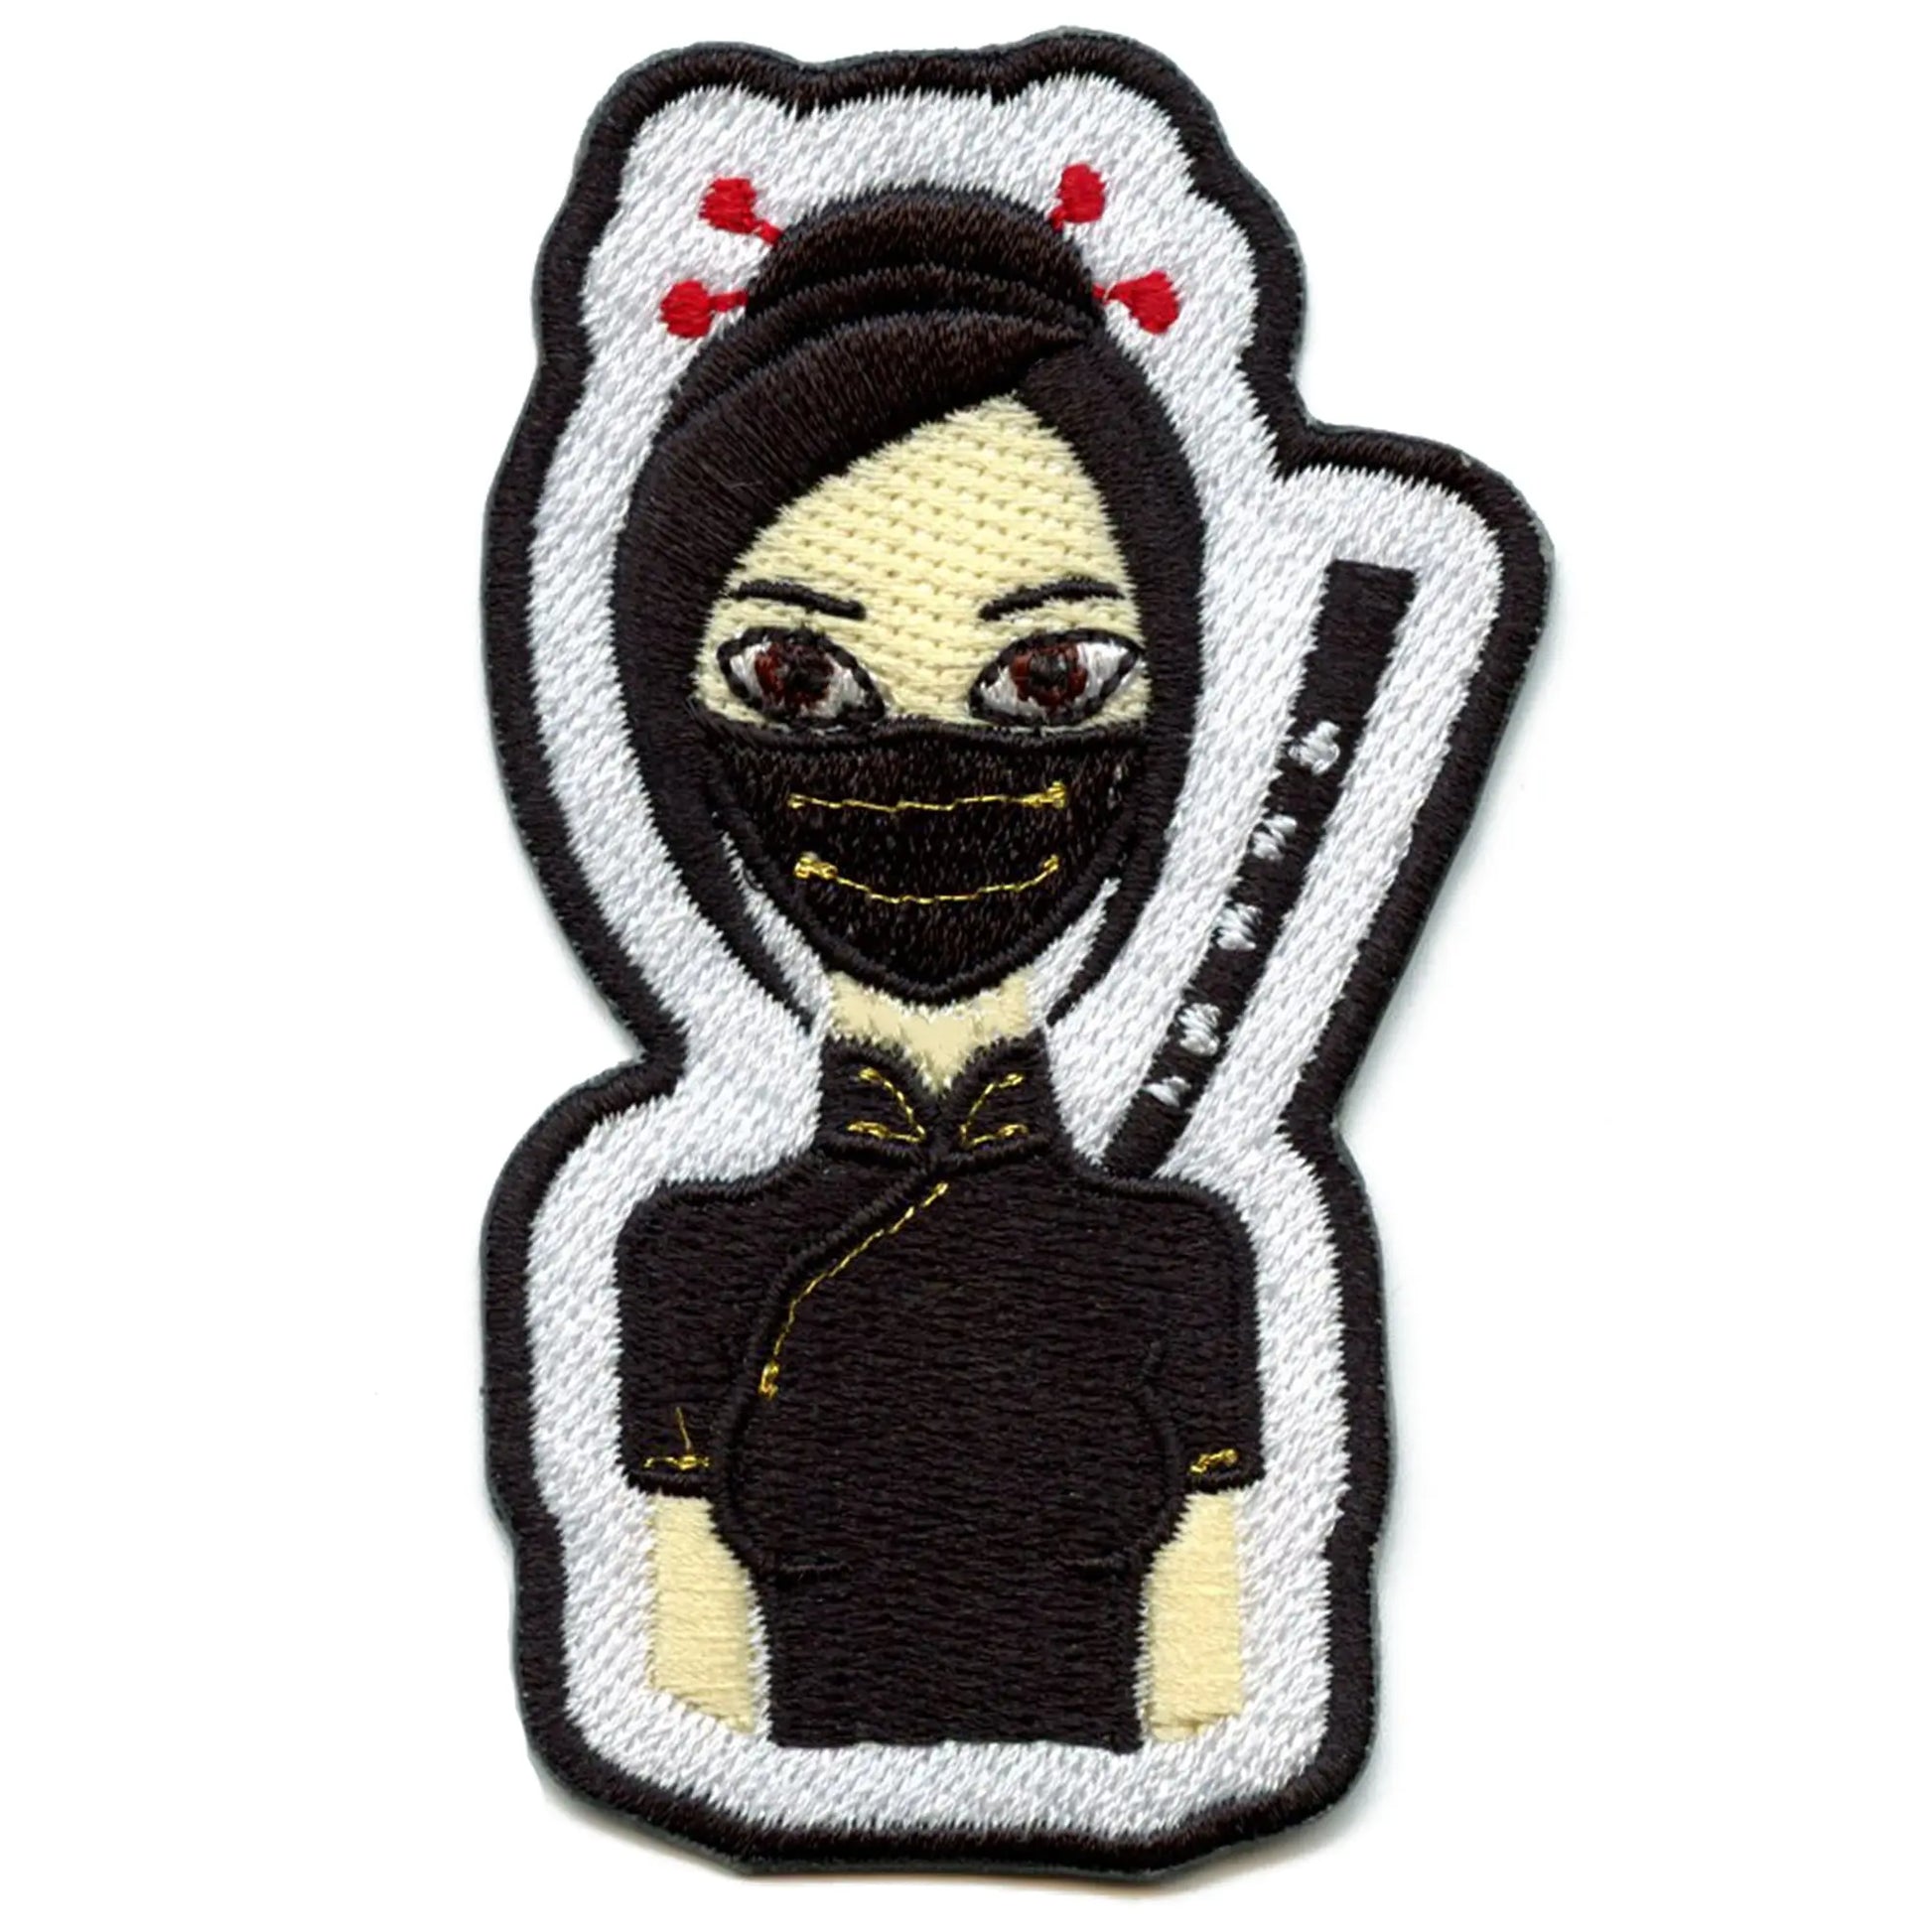 I'm Not A Virus Woman Embroidered Iron On Patch